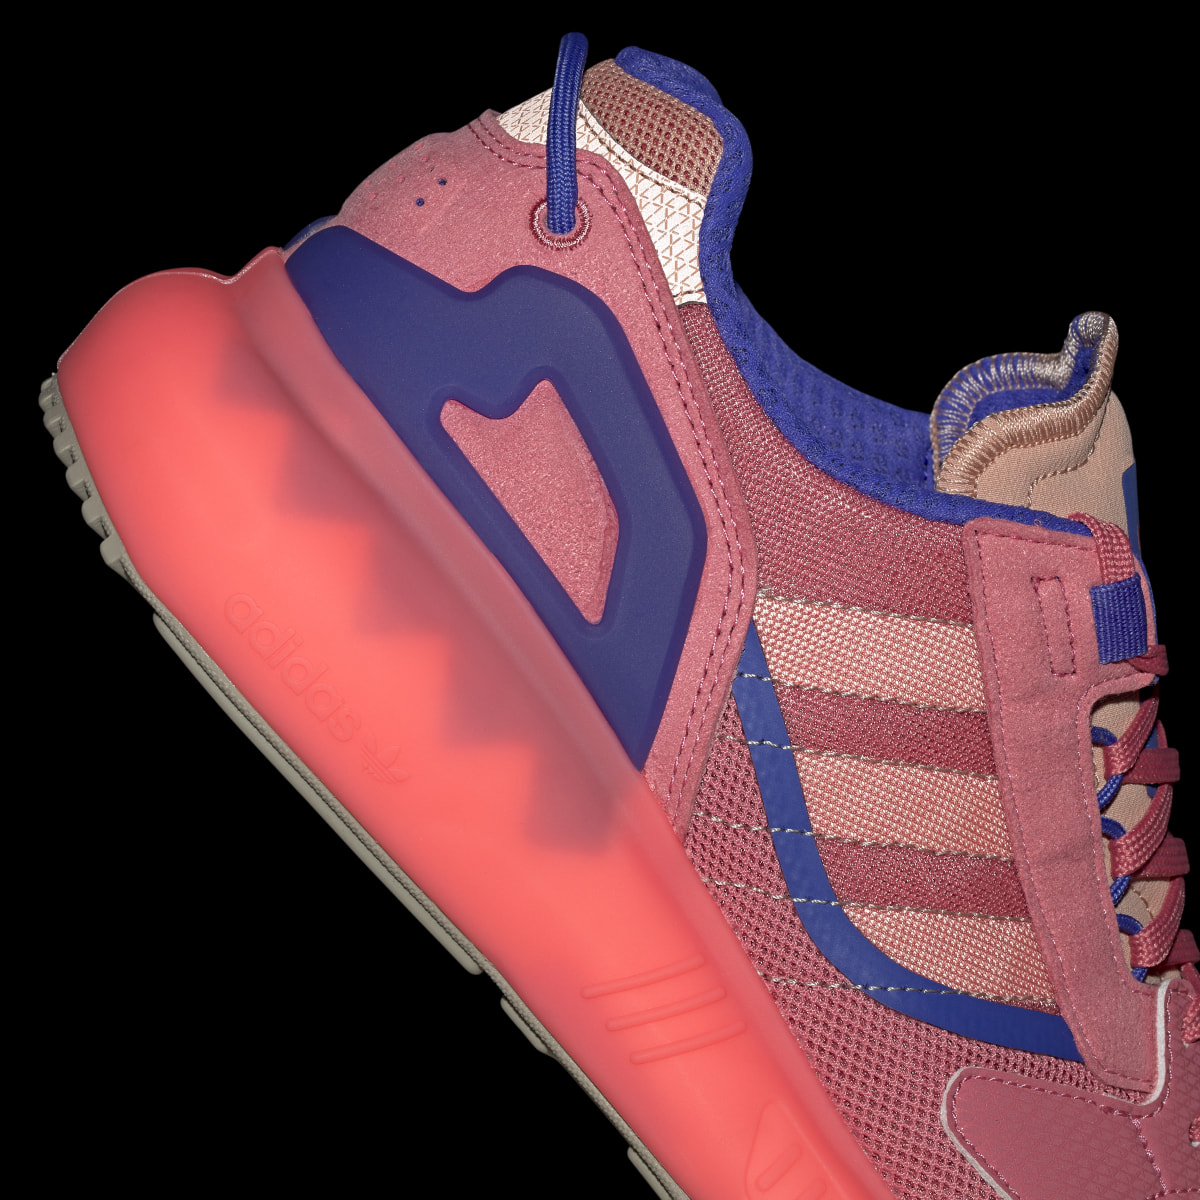 Adidas ZX 5K BOOST Shoes. 4